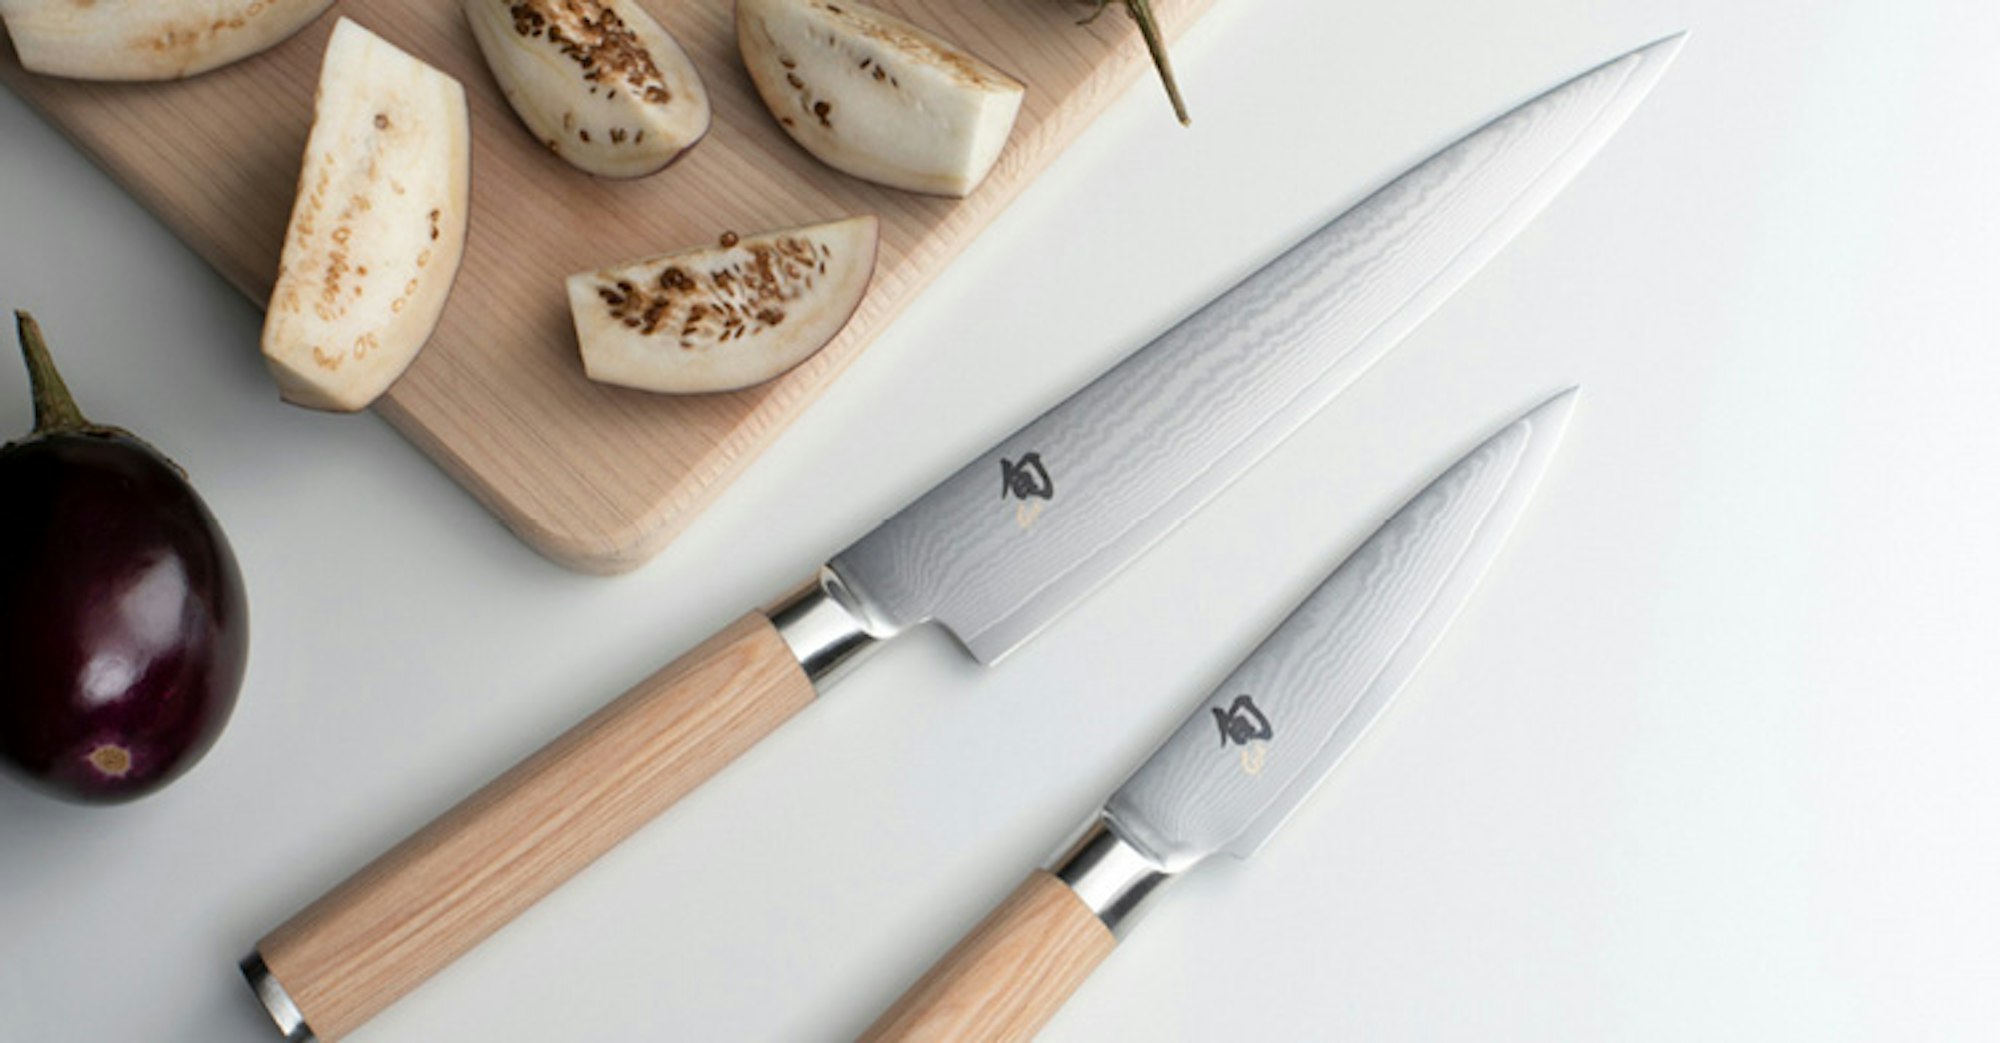  Japanese steel knives, knife sets, and kitchenware.